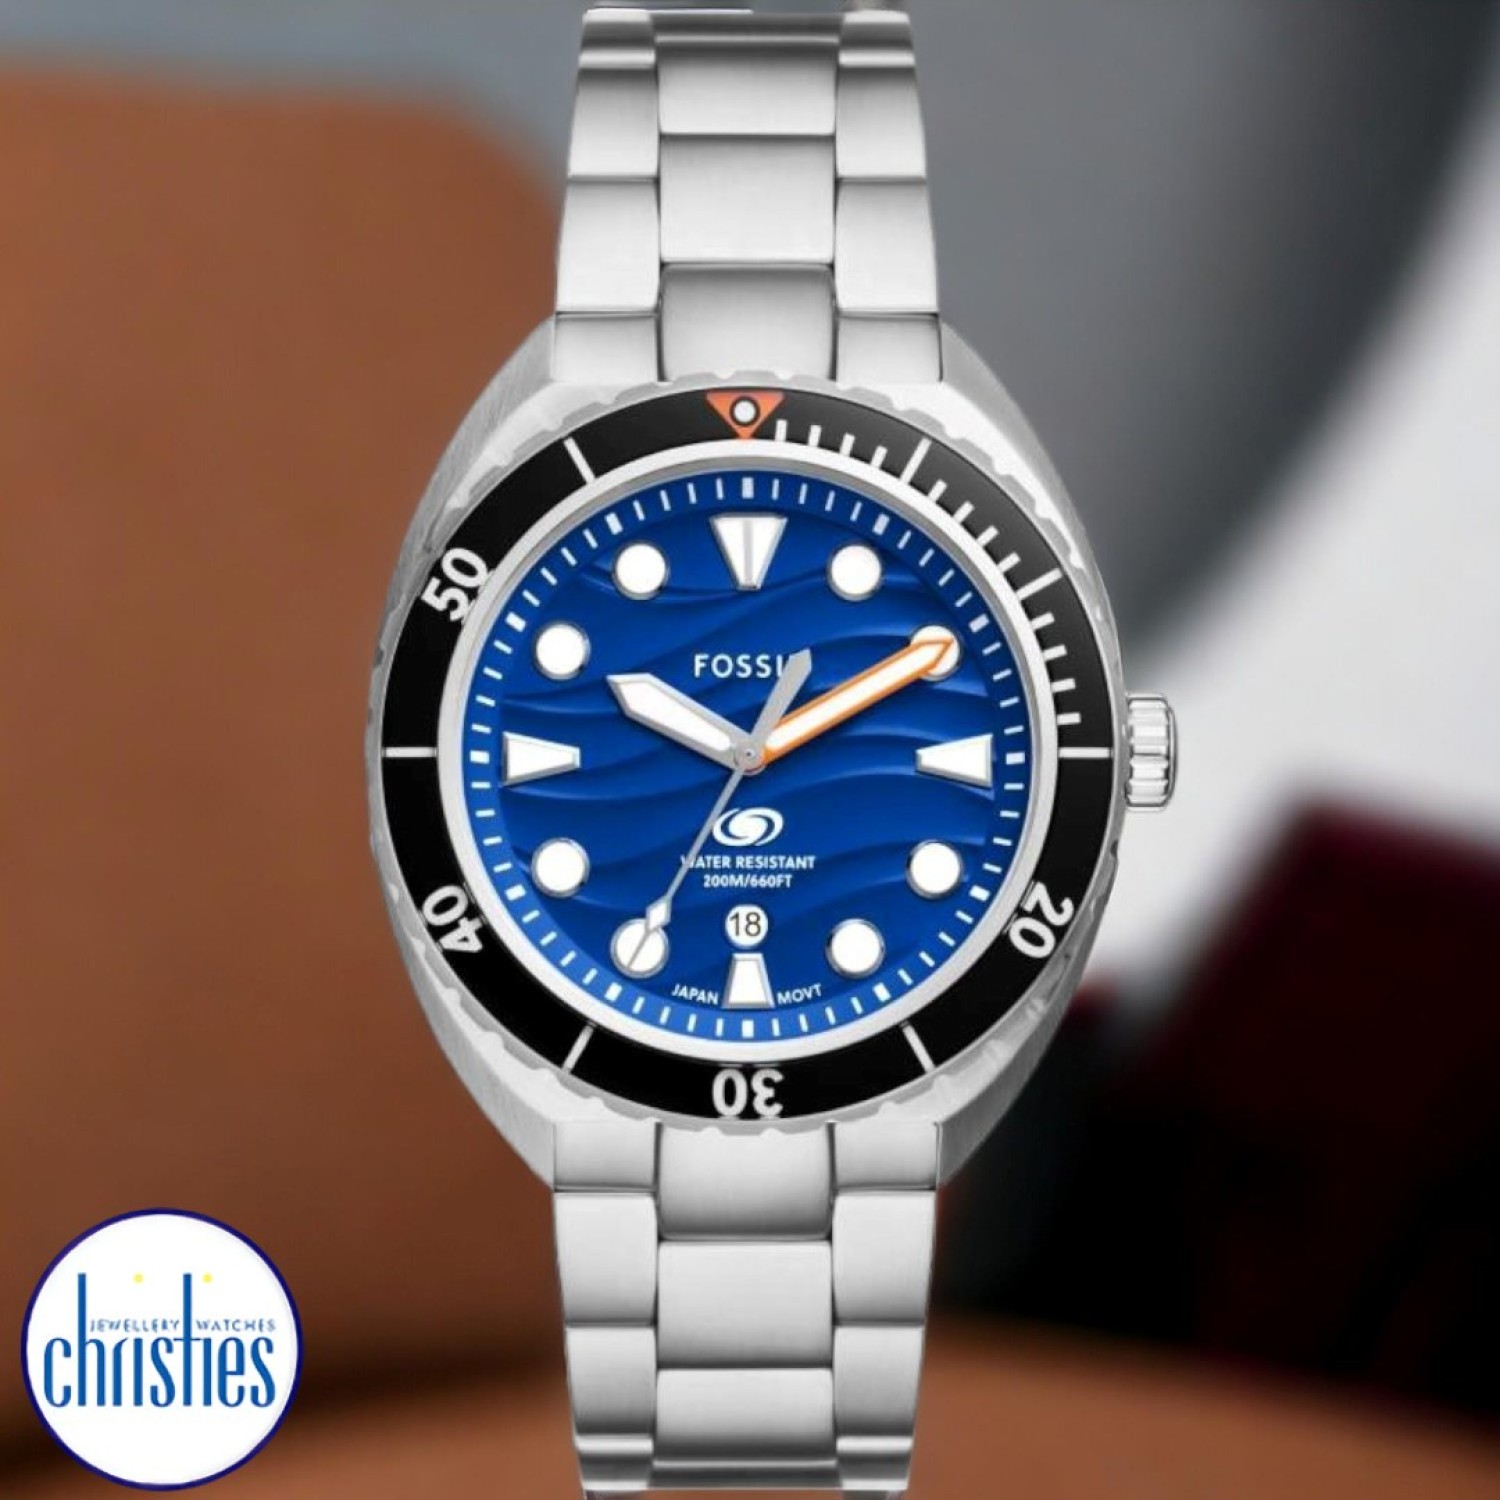 FS6064 Fossil Breaker Blue Dial Watch FS6064 Fossil Watches in New Zealand - Buy Men’s and Women’s Watches Online - Free Delivery and Afterpay Options